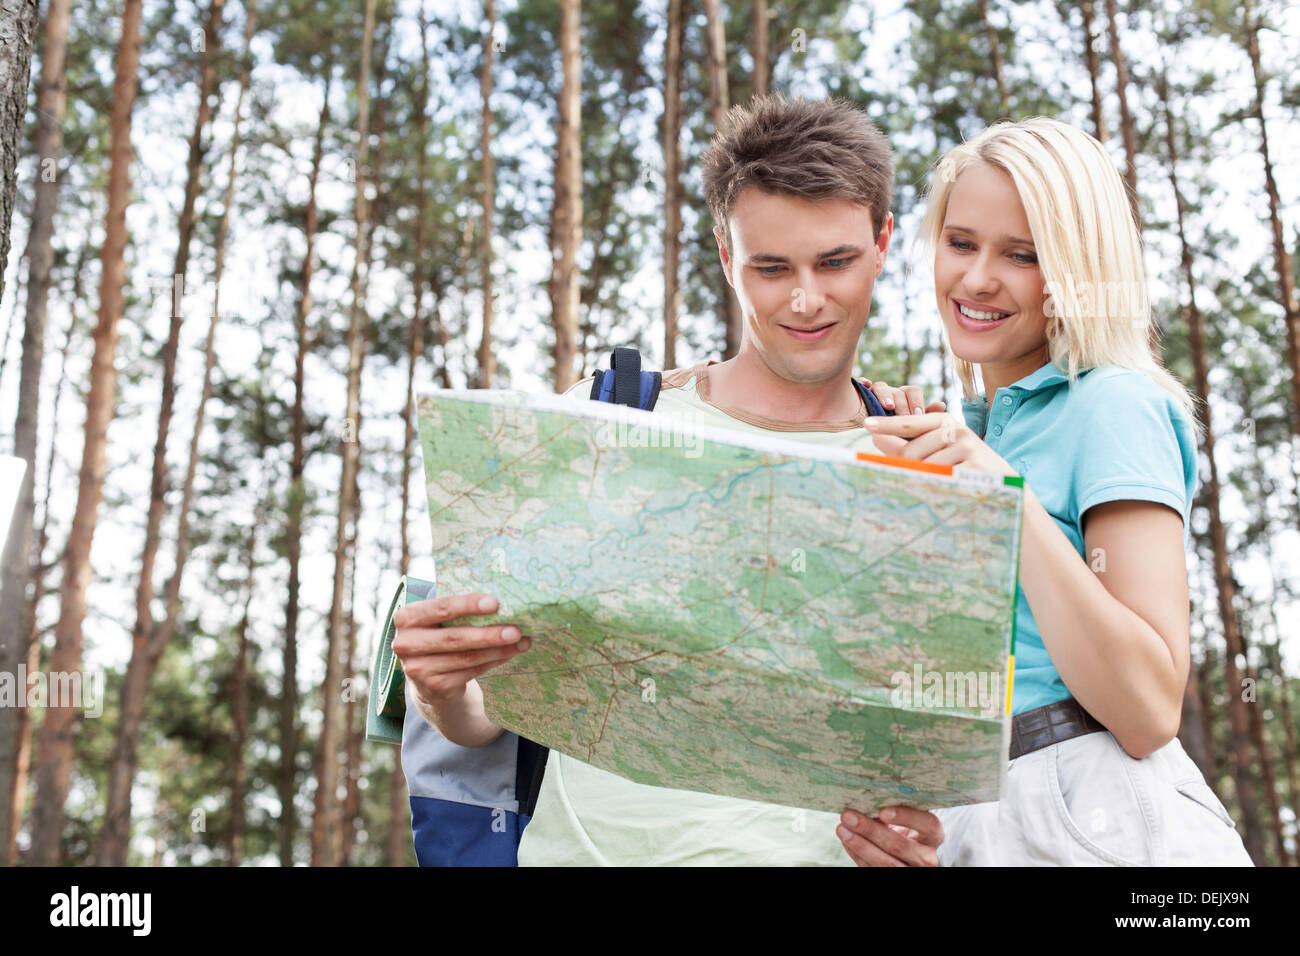 Young hiking couple reading map forest Stock Photo